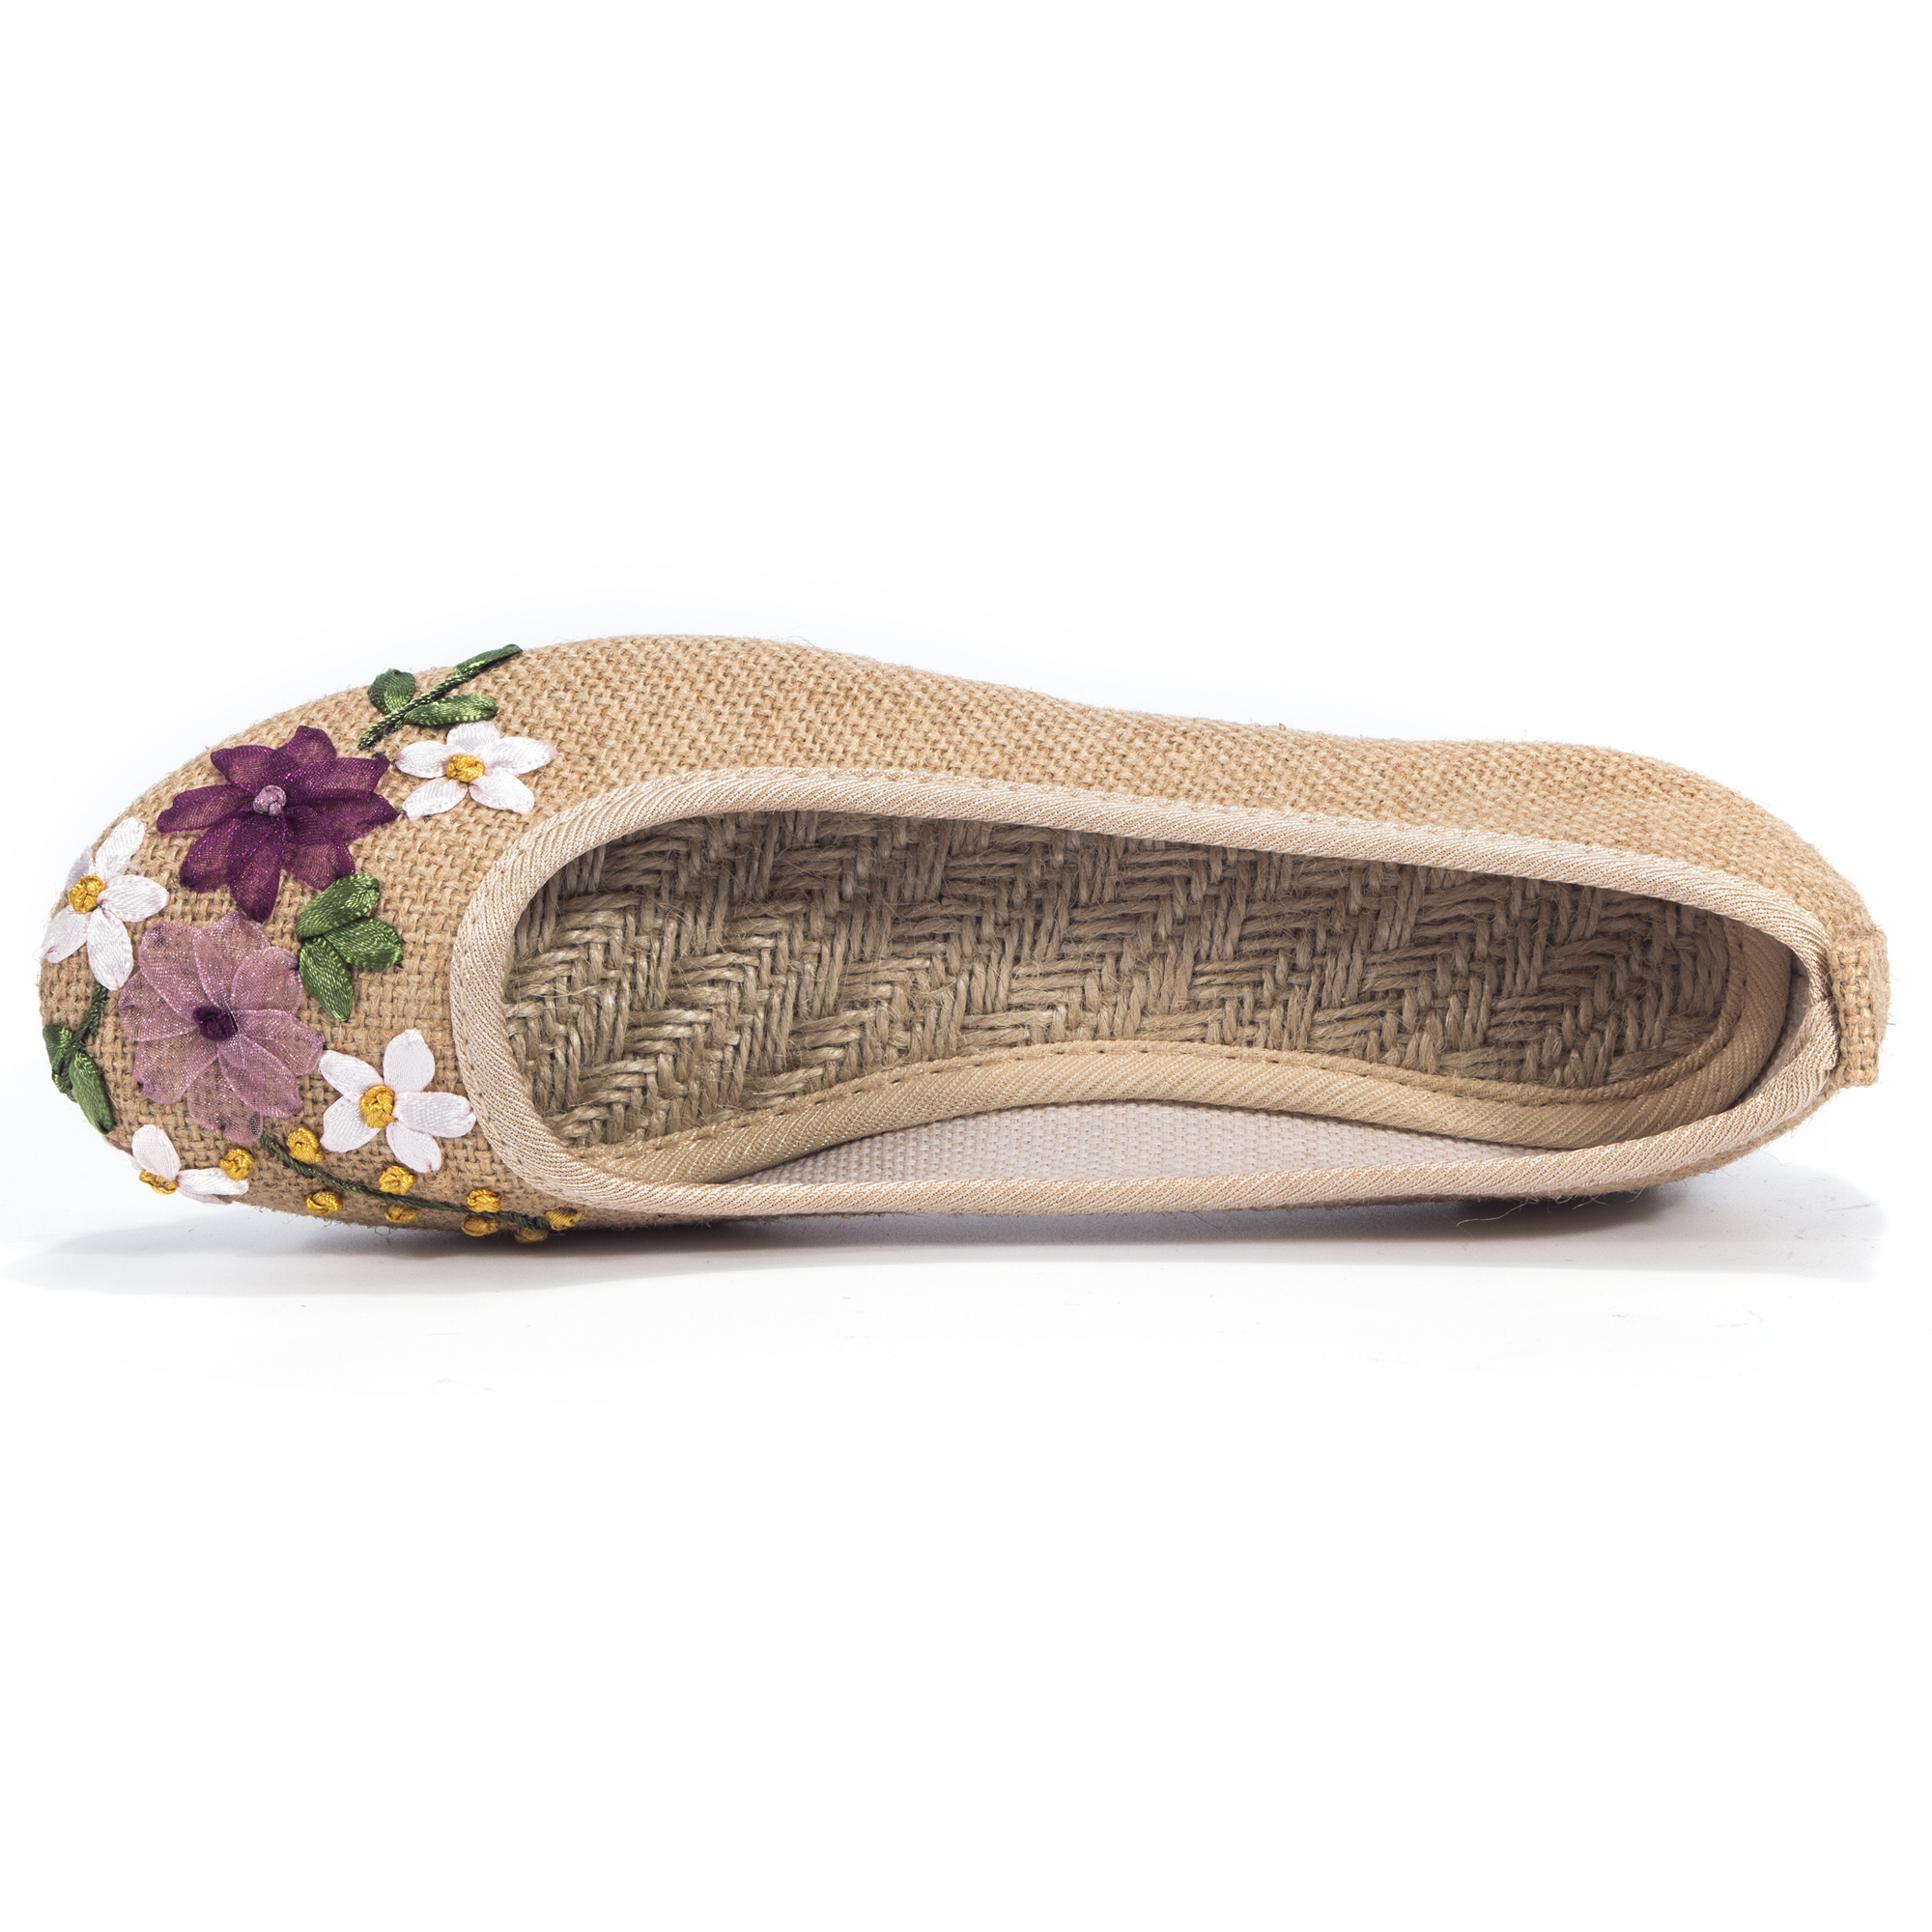 DODOING Womens Ballet Flats Floral Embroidered Cut Platform Shoe Slip On Casual Driving Loafers - image 3 of 7